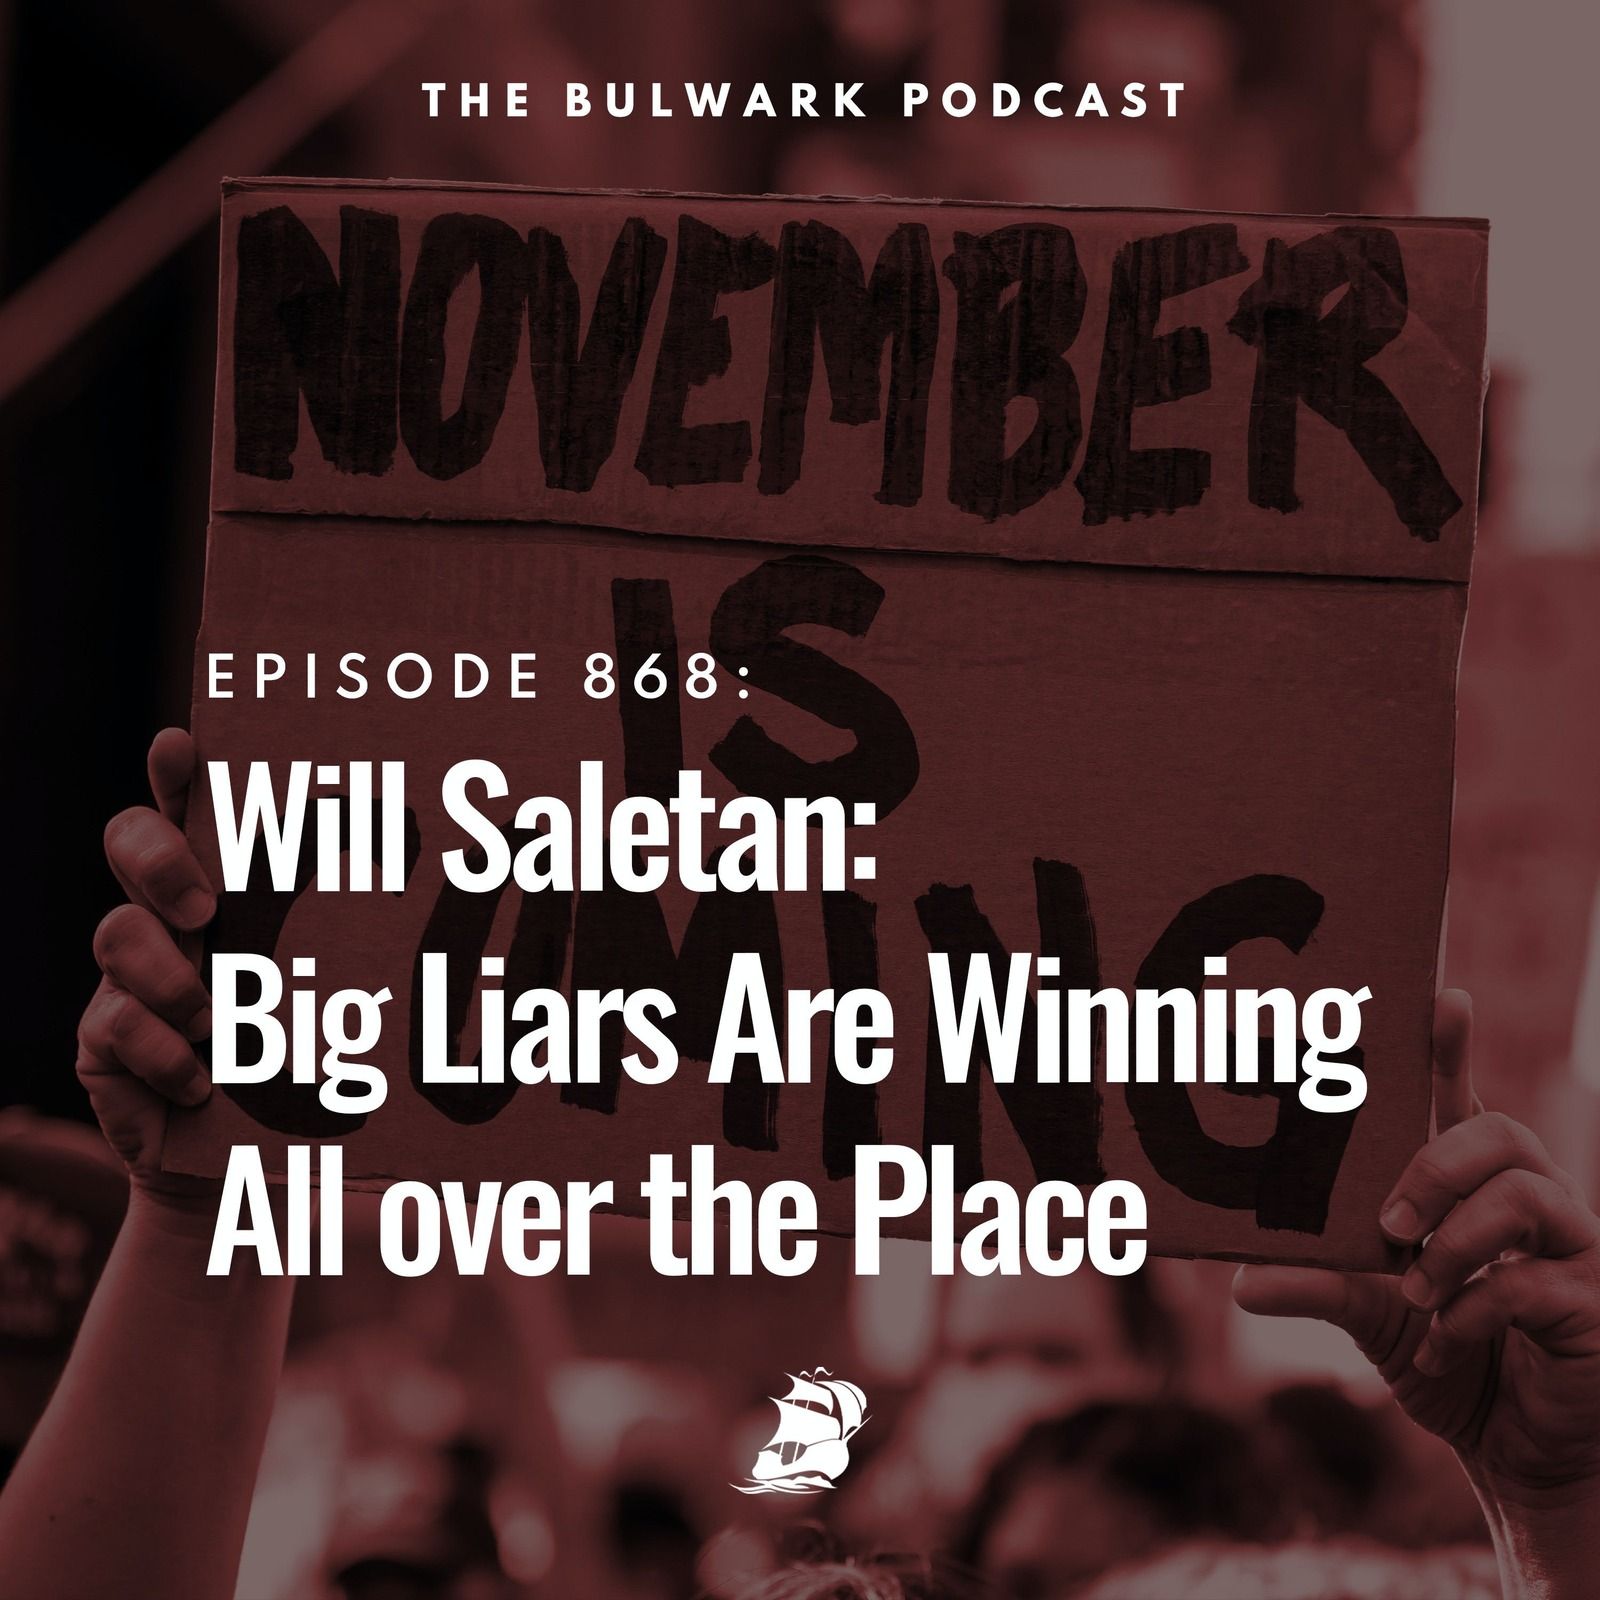 Will Saletan: Big Liars Are Winning All over the Place